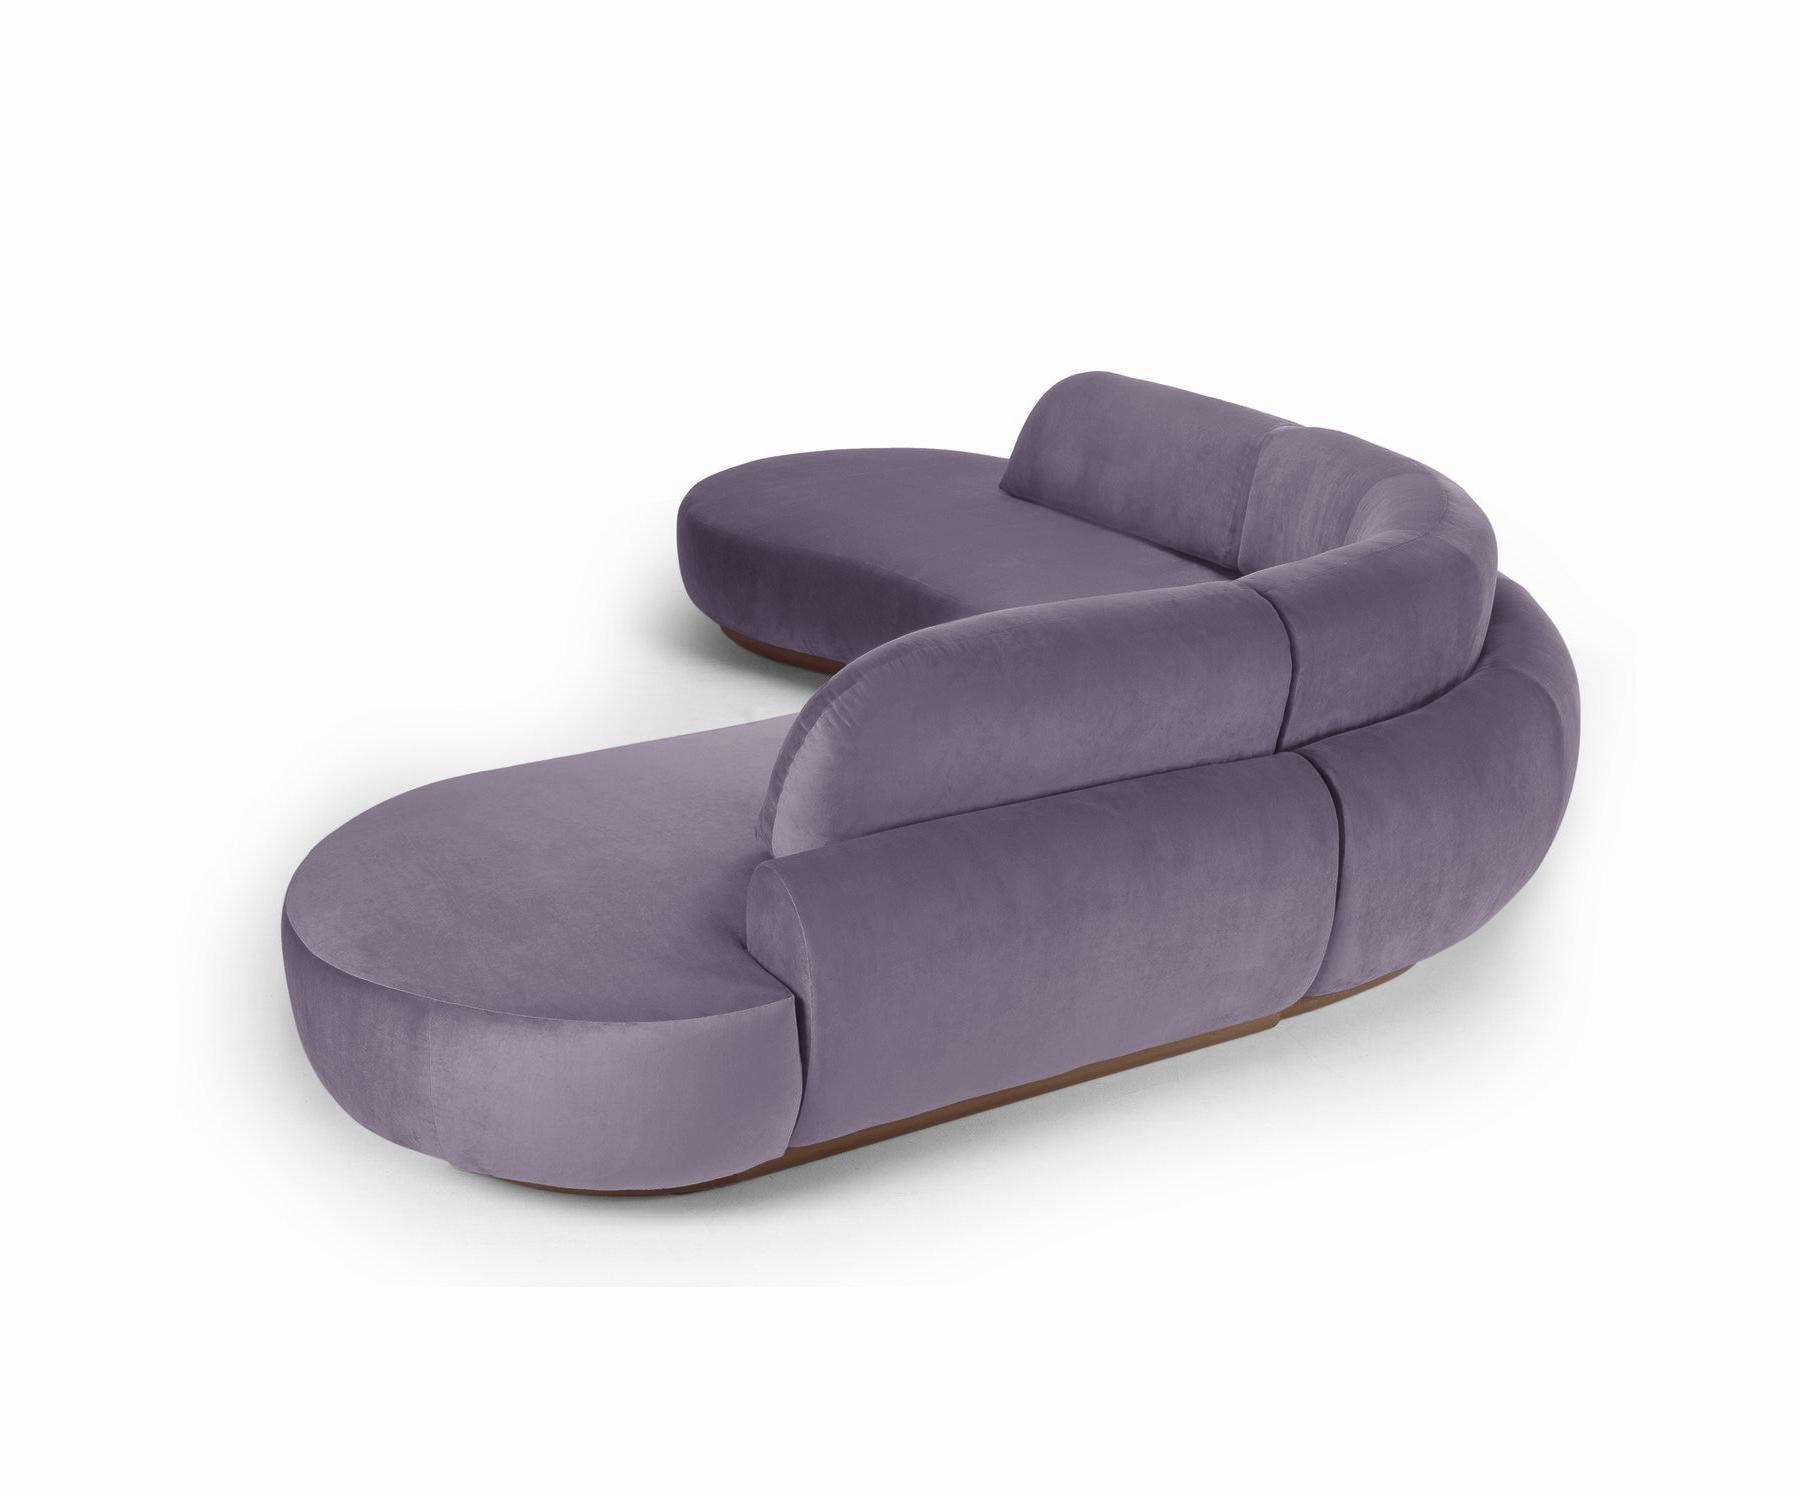 Portuguese Naked Curved Sectional Sofa, 3 Piece with Beech Ash-056-1 and Paris Lavanda For Sale